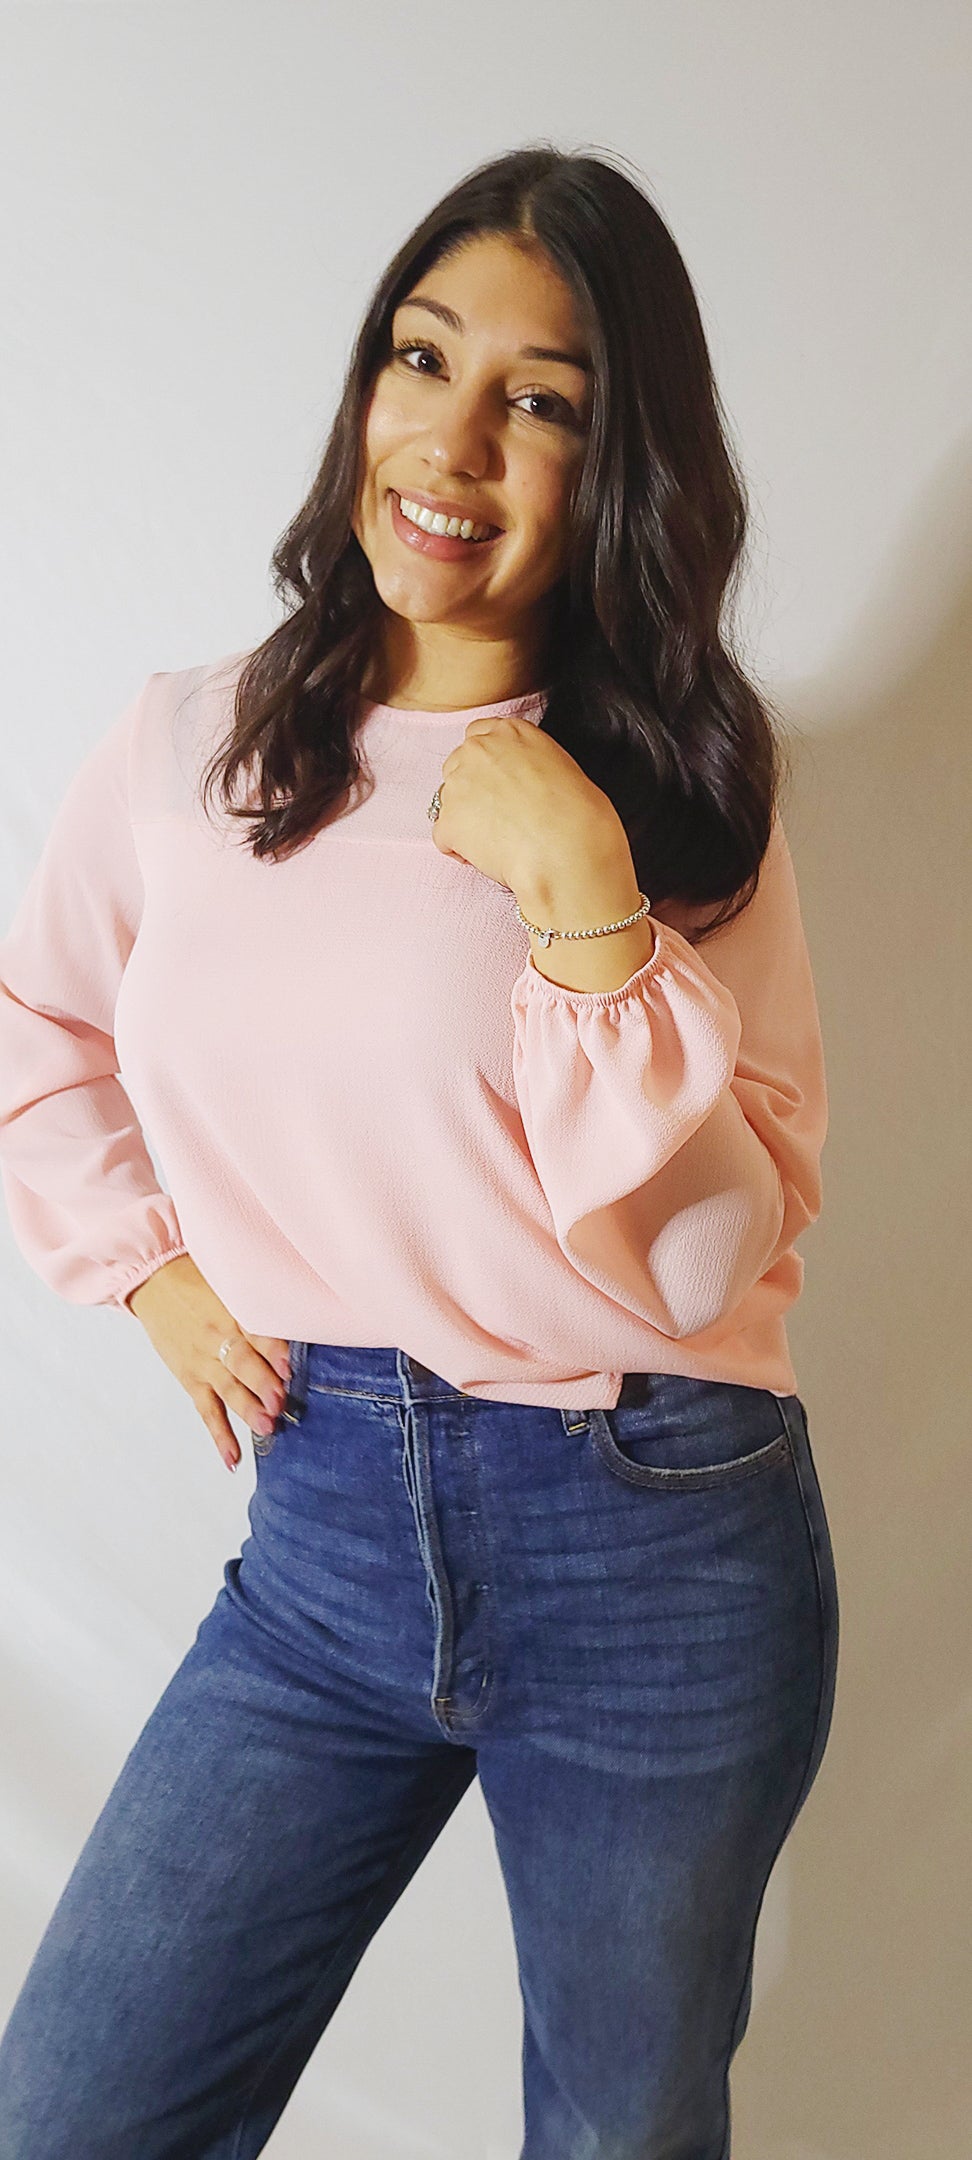 Pink Layered Blouse Top